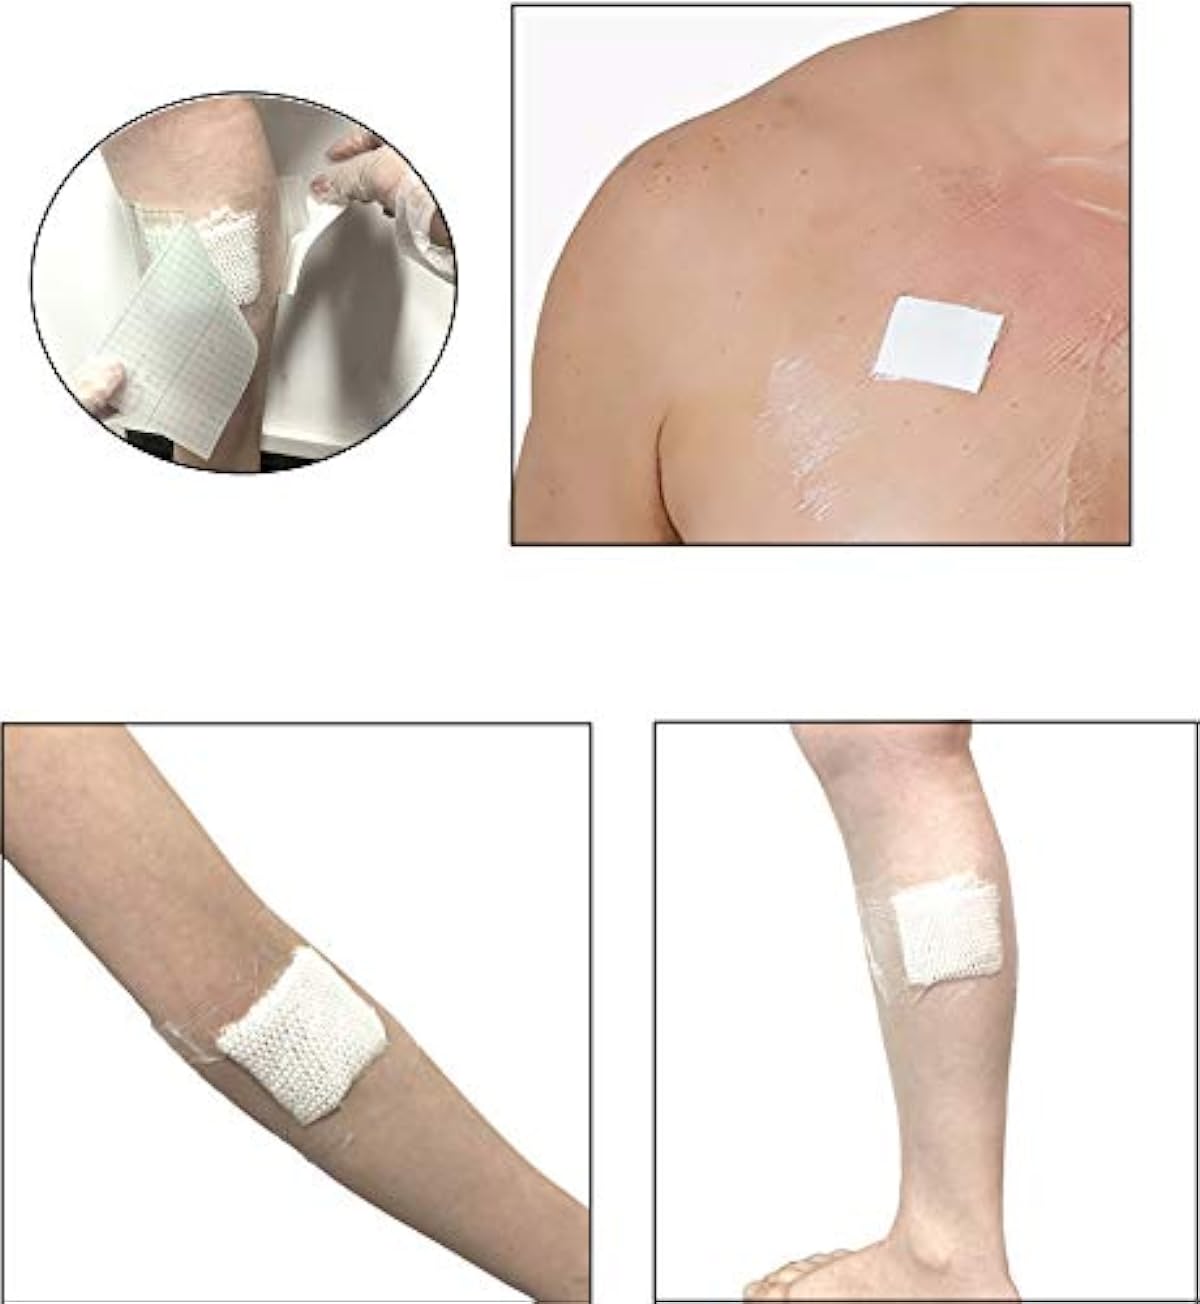 PICC Moisture Barrier for Shower - Transparent Film Wound Dressing Protection Cover, 4 x 4 Inch (28 Pcs)